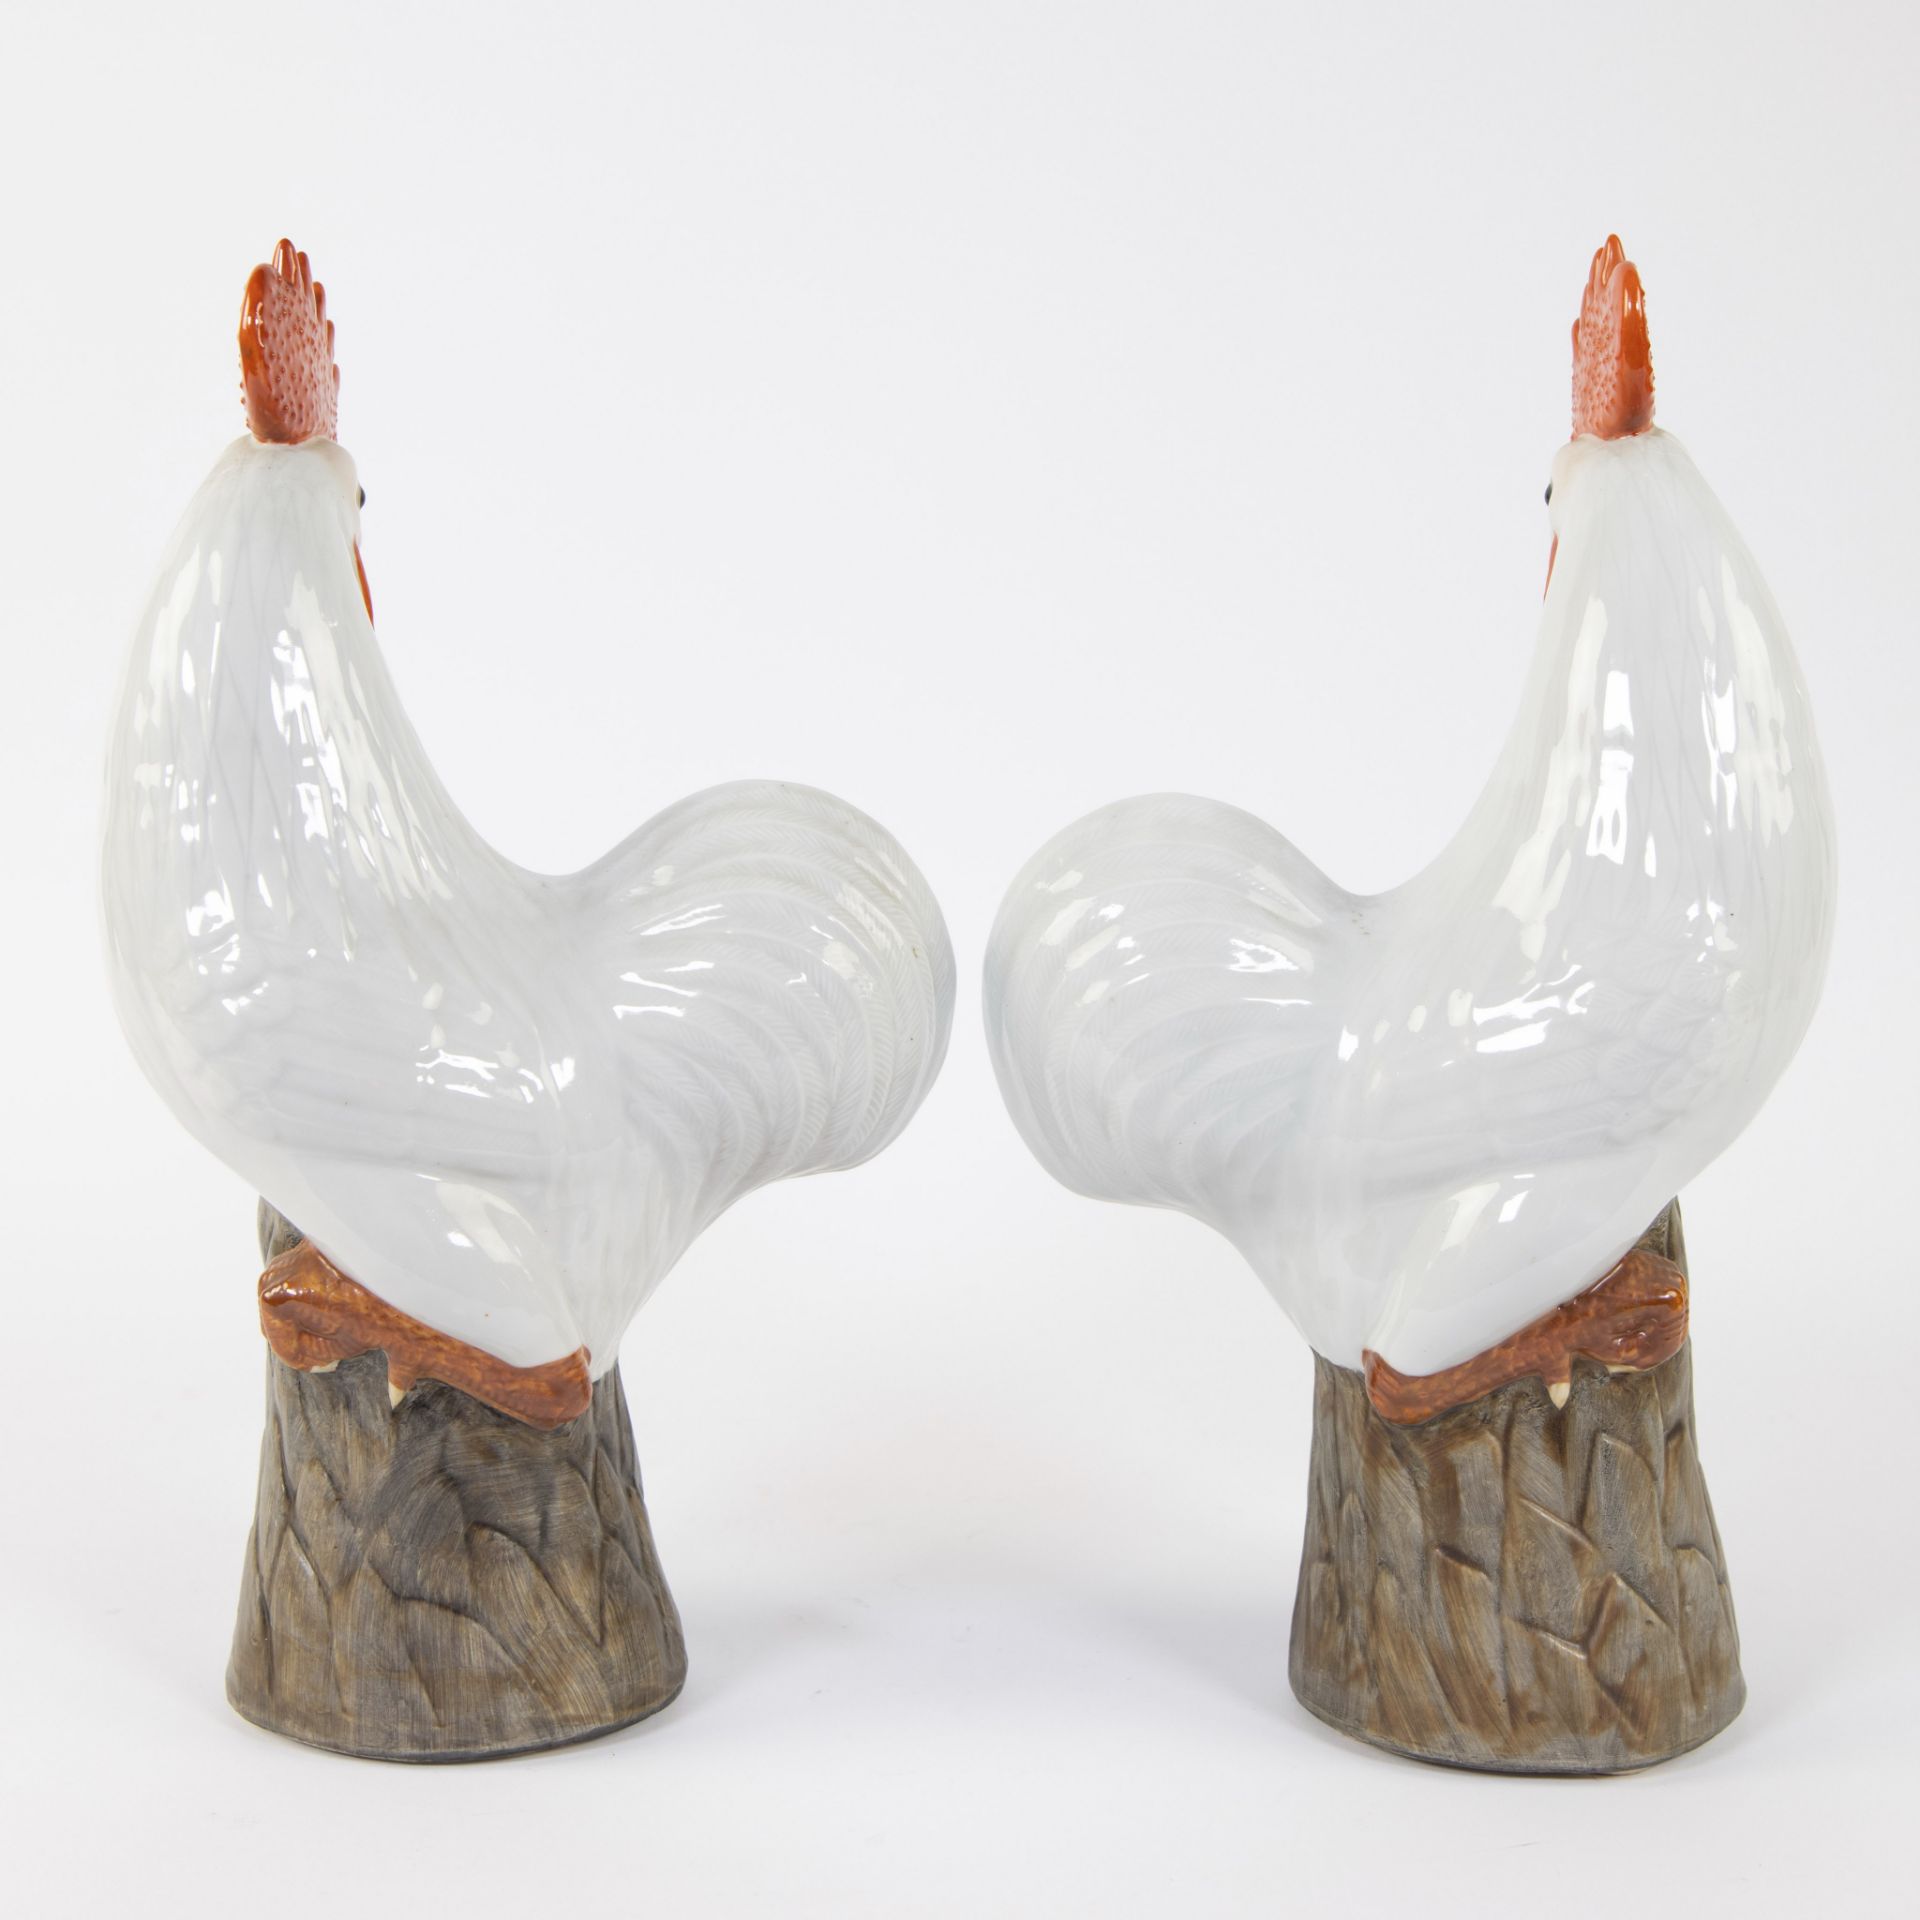 Pair of Chinese roosters in white ceramics, 20th century - Image 3 of 5